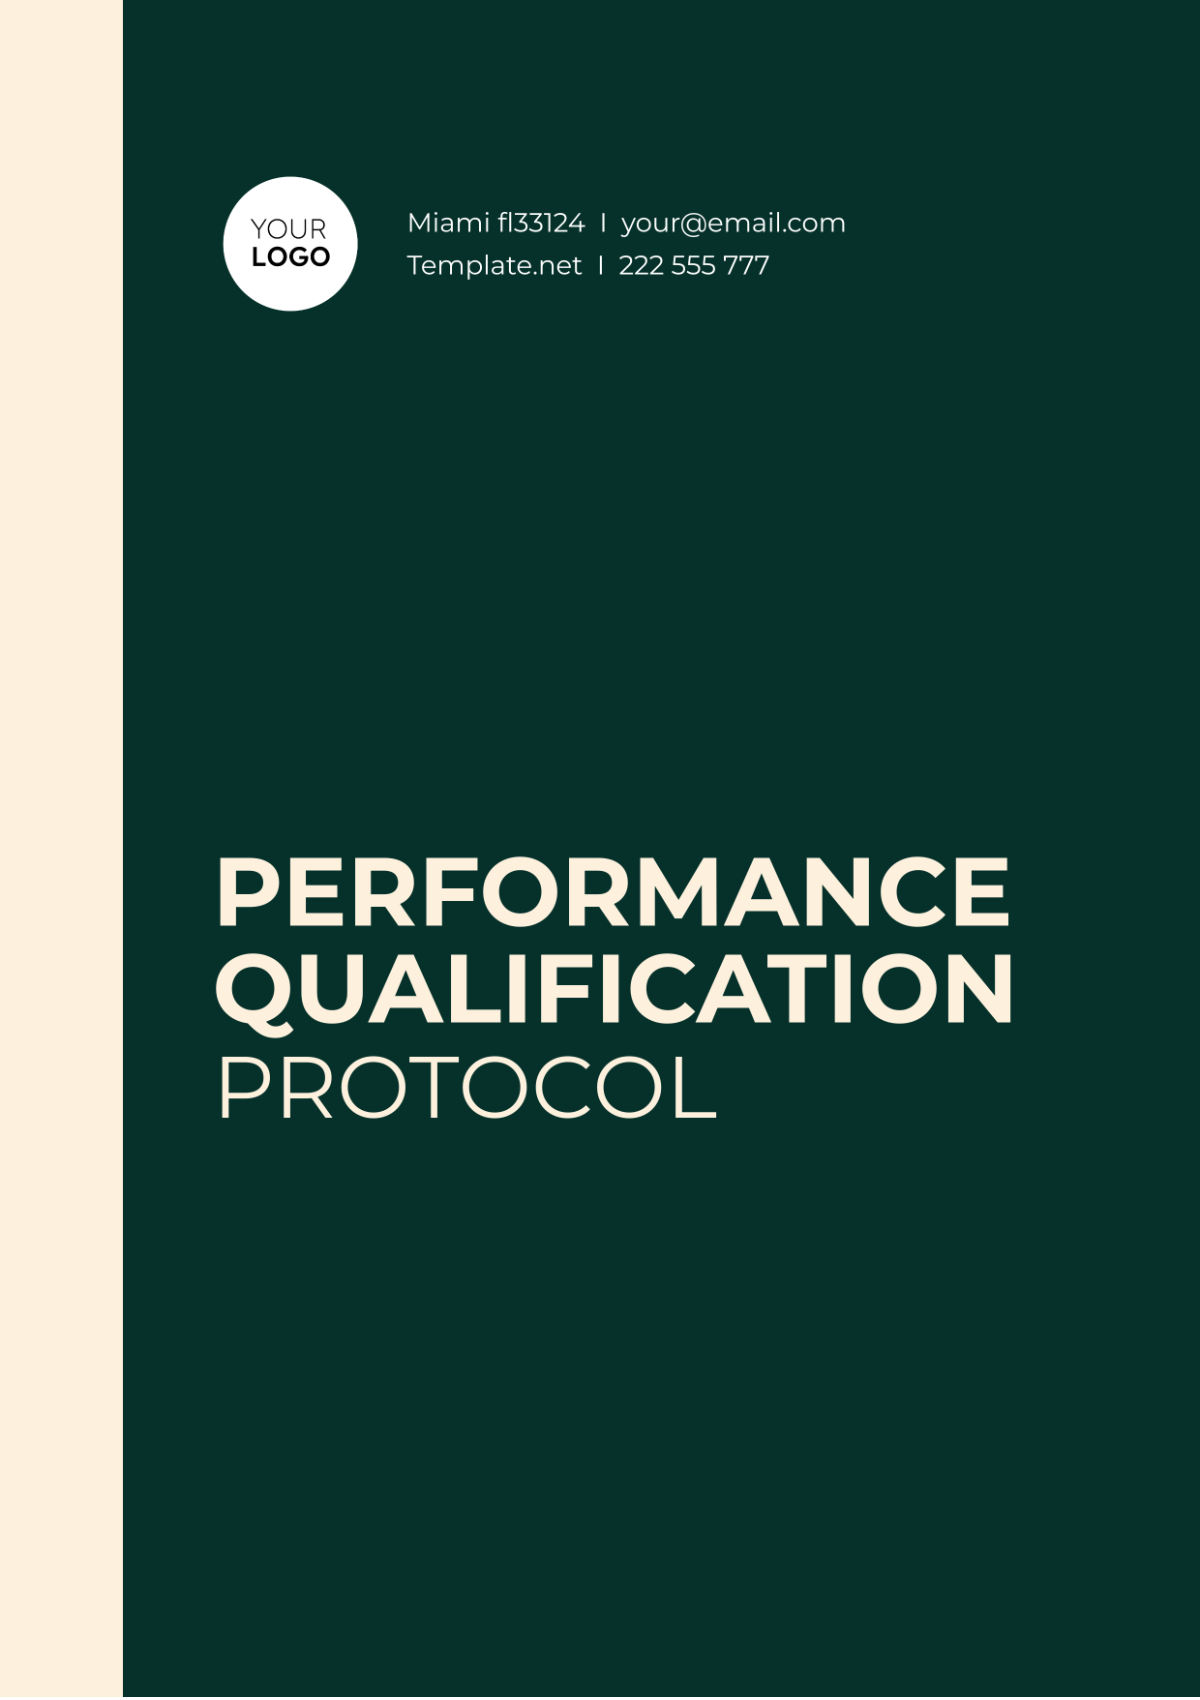 Performance Qualification Protocol Template